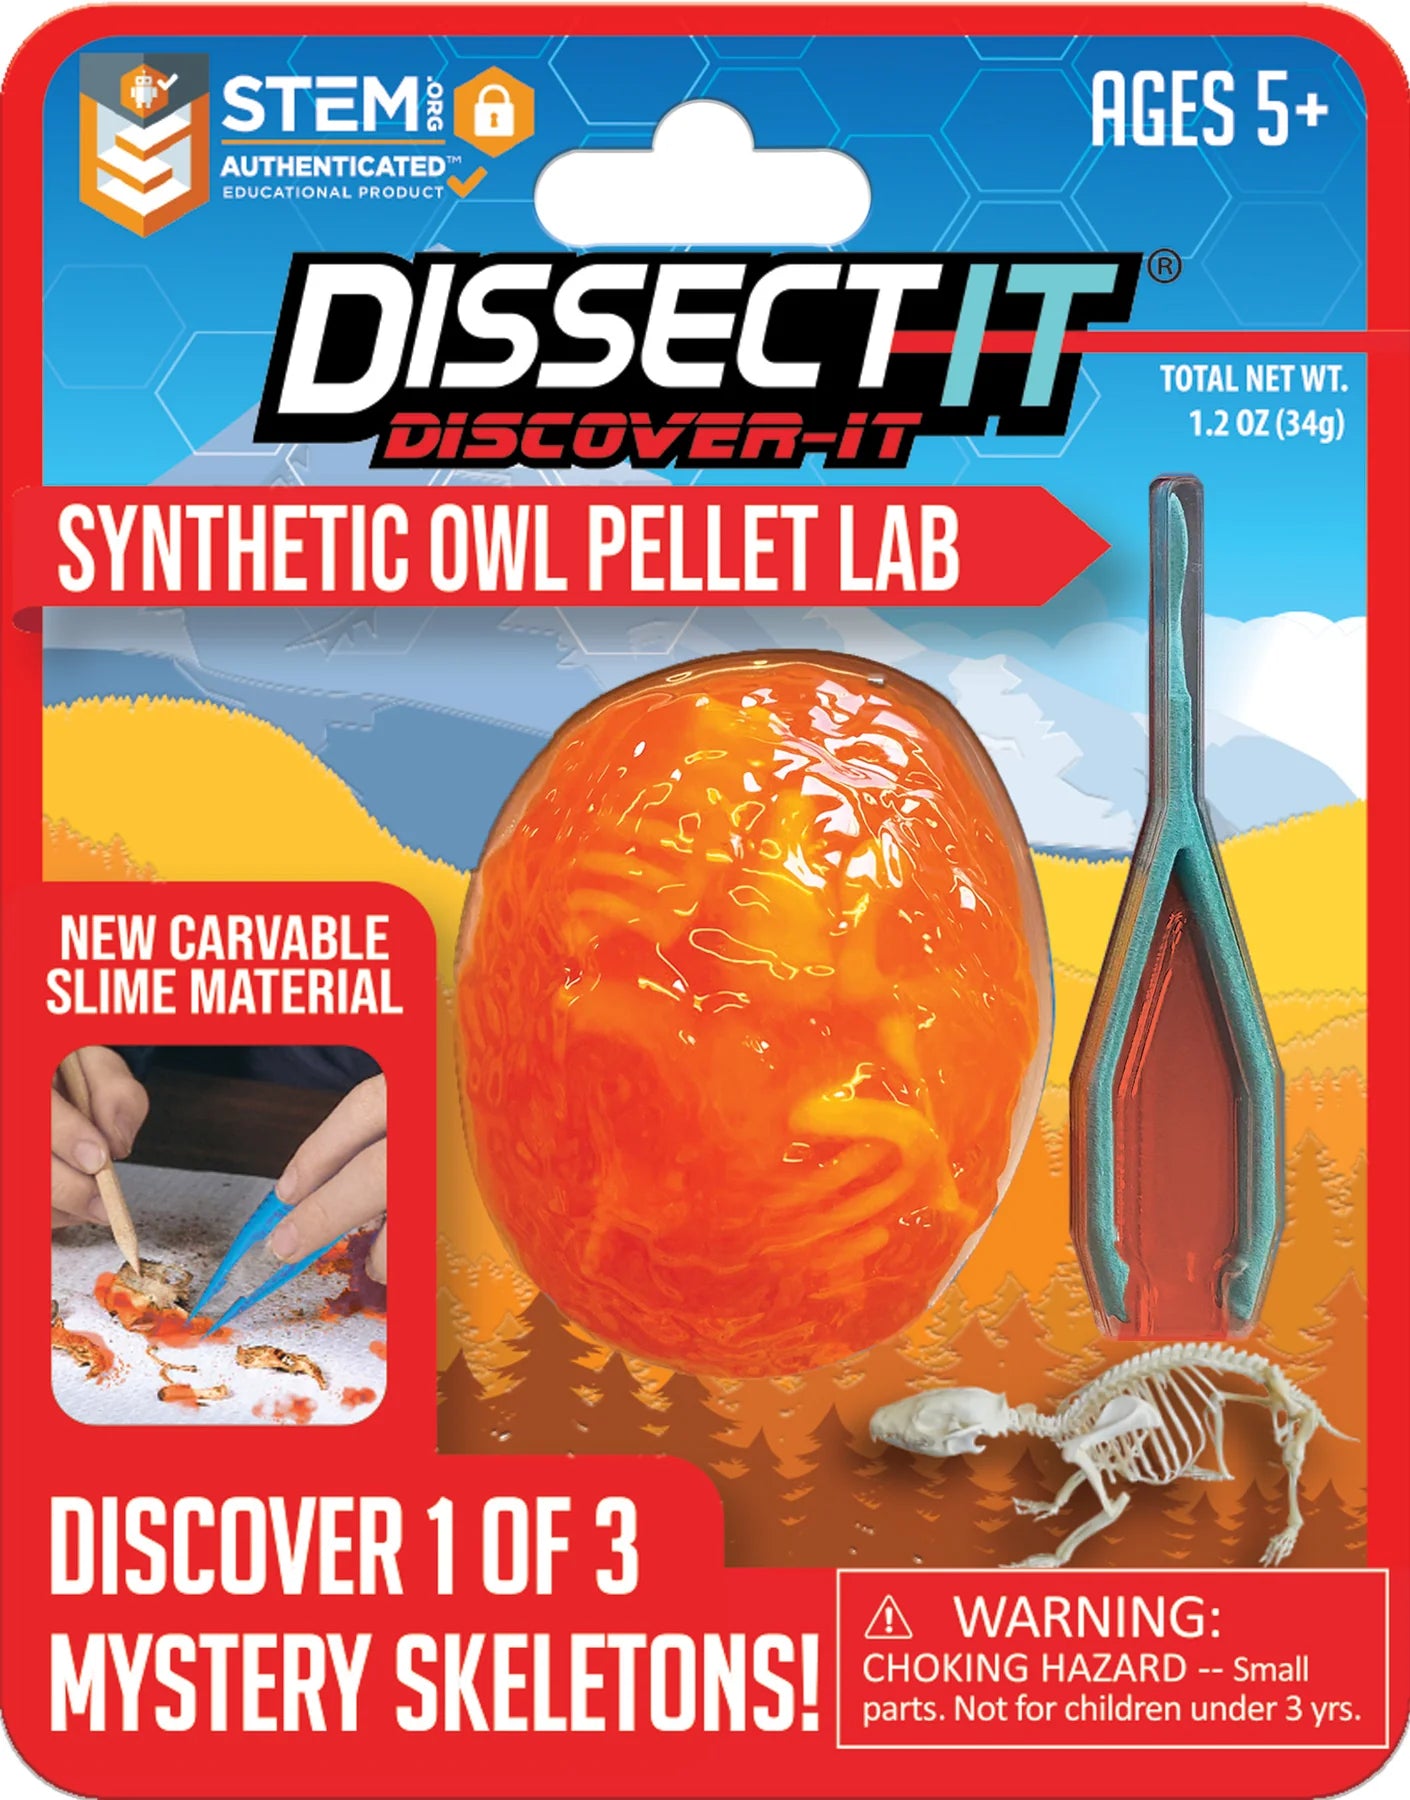 Dissect It: Synthetic Owl Pellet Lab by Top Secret Toys #1126-9912